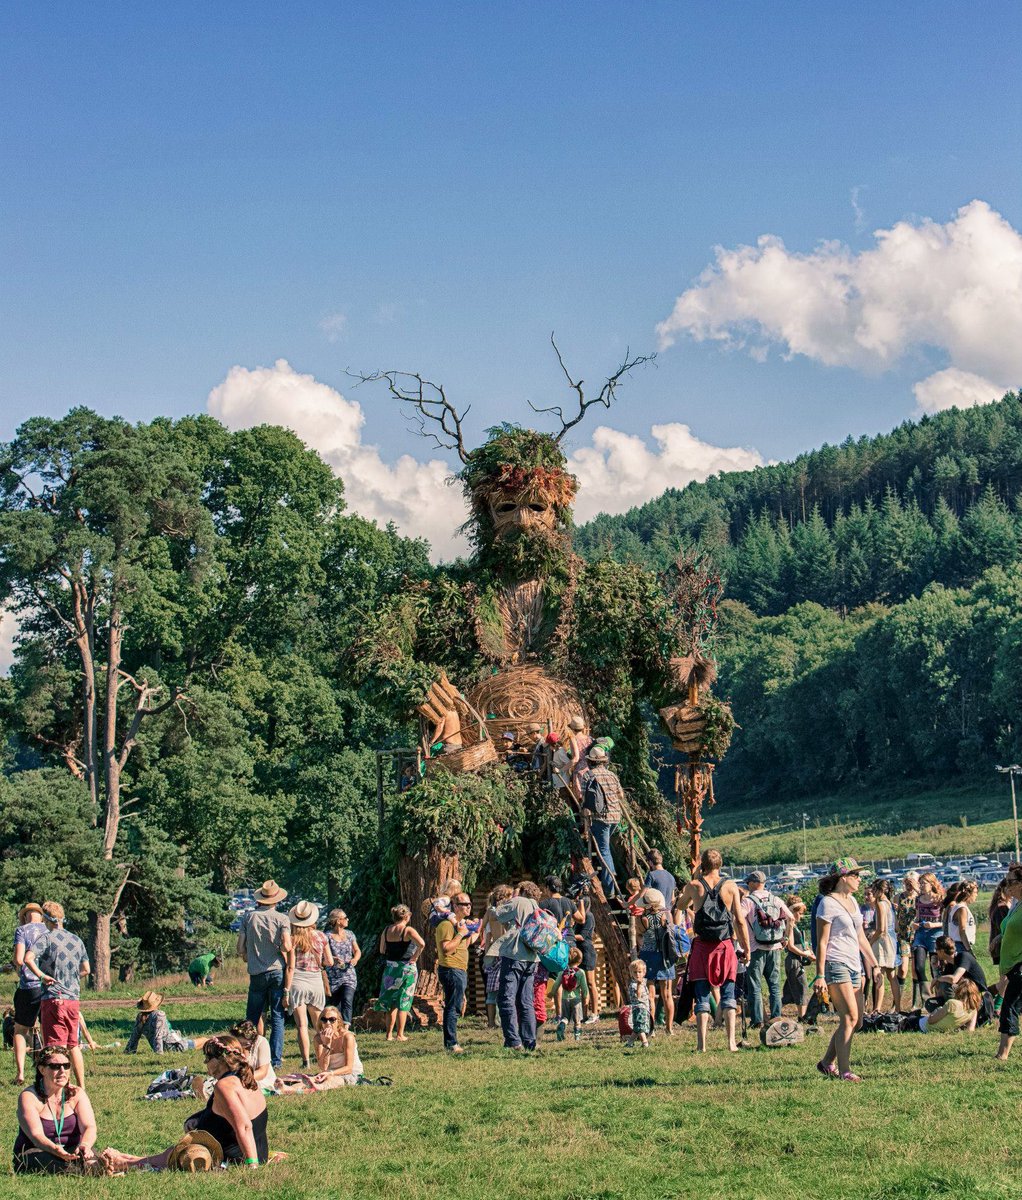 RT @GreenManFest: It's but 137 curious days until we shall meet again, to revel & feast once more... ???? https://t.co/NCsh6qRUjz